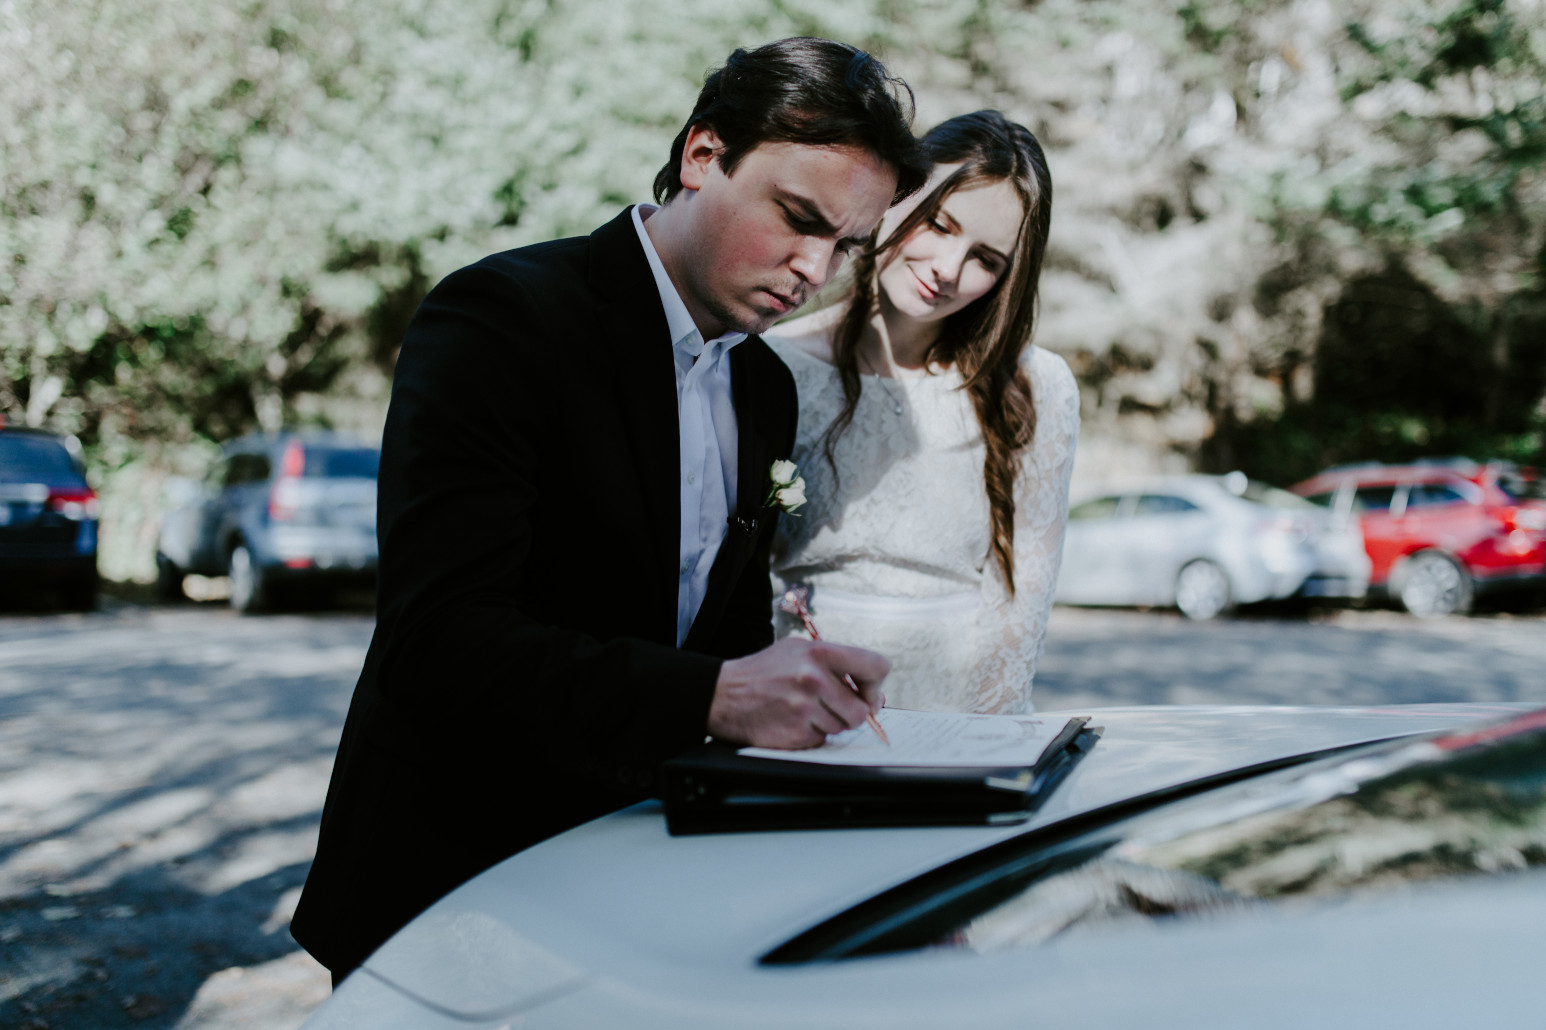 Nicole and Vlad sign their marriage certificate. Elopement wedding photography at Cannon Beach by Sienna Plus Josh.